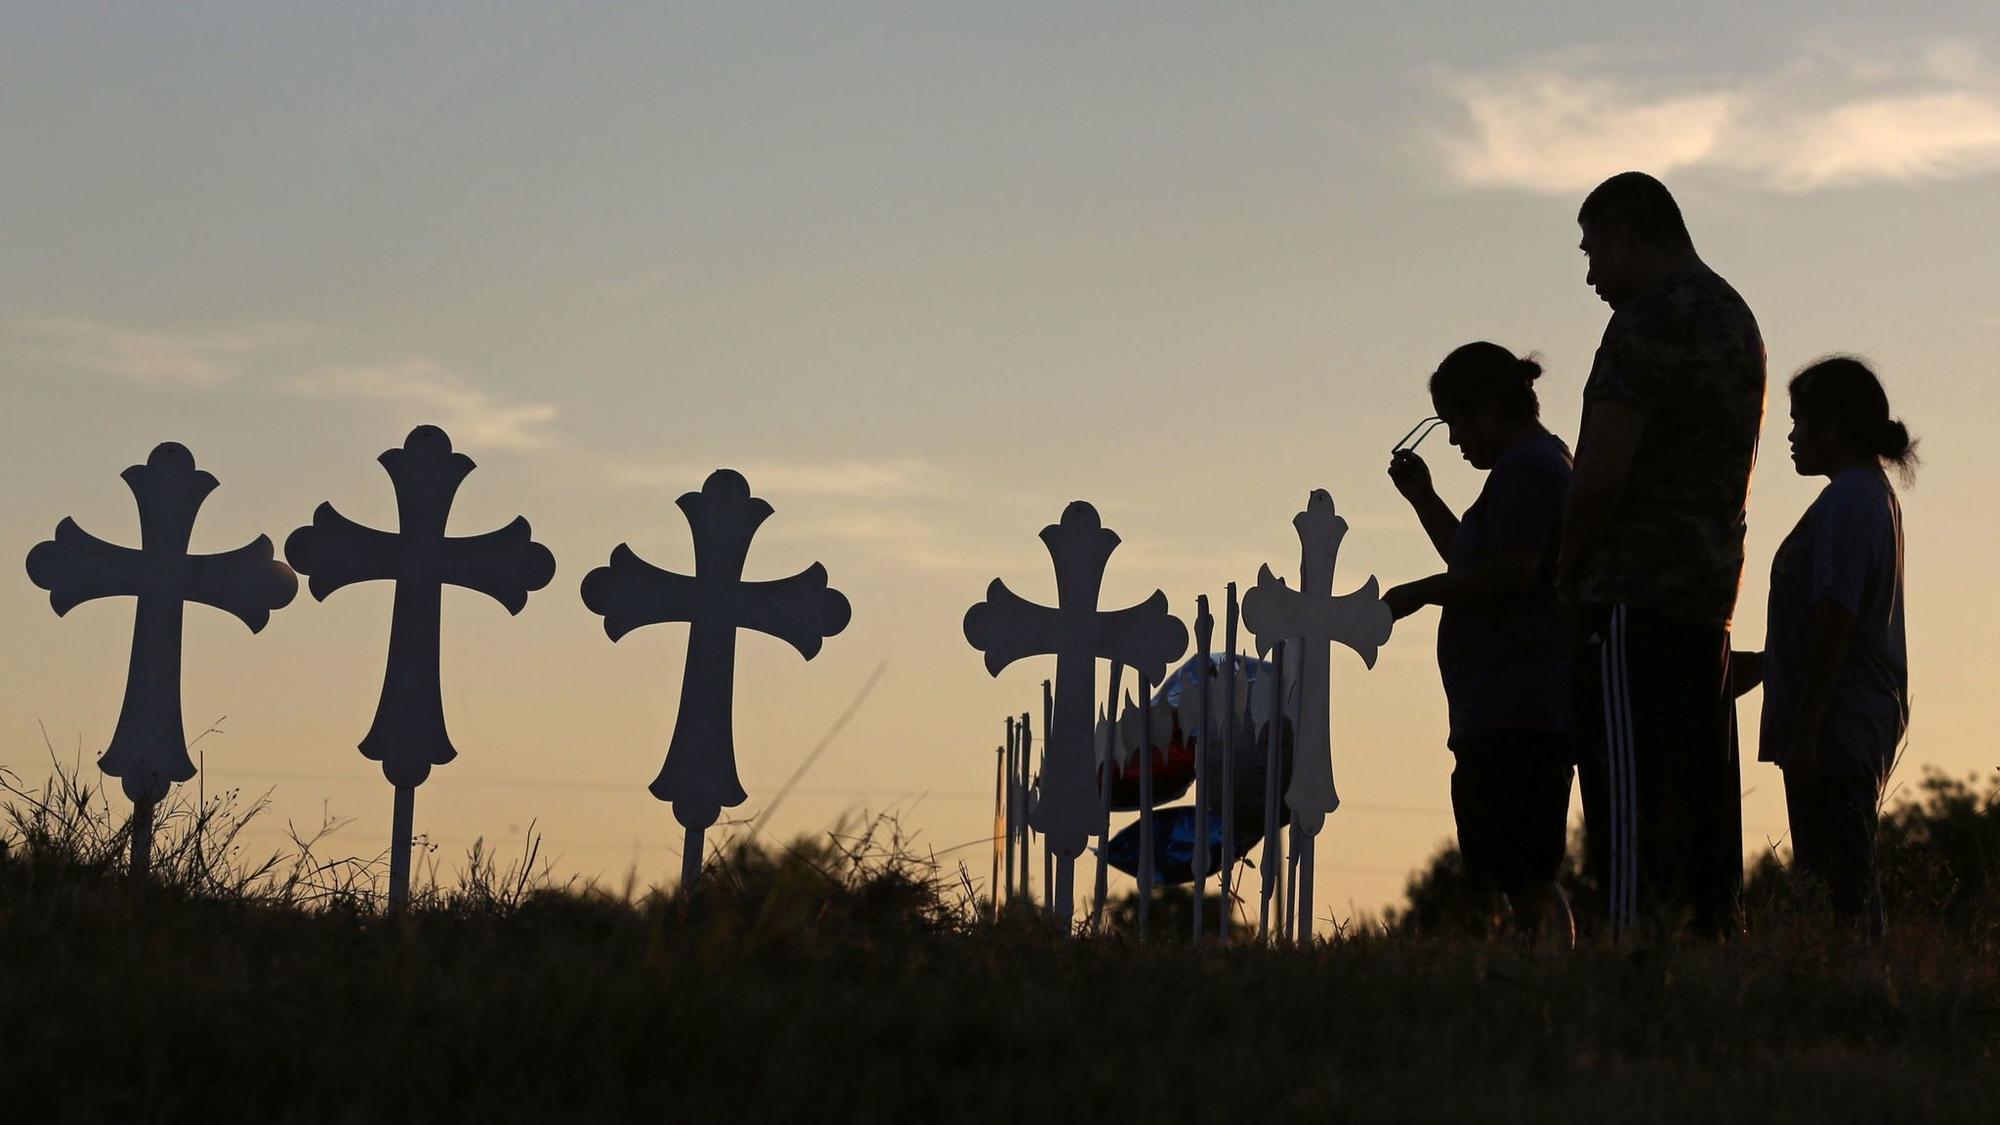 Authorities identify the victims of the Texas church shooting - LA Times2000 x 1125